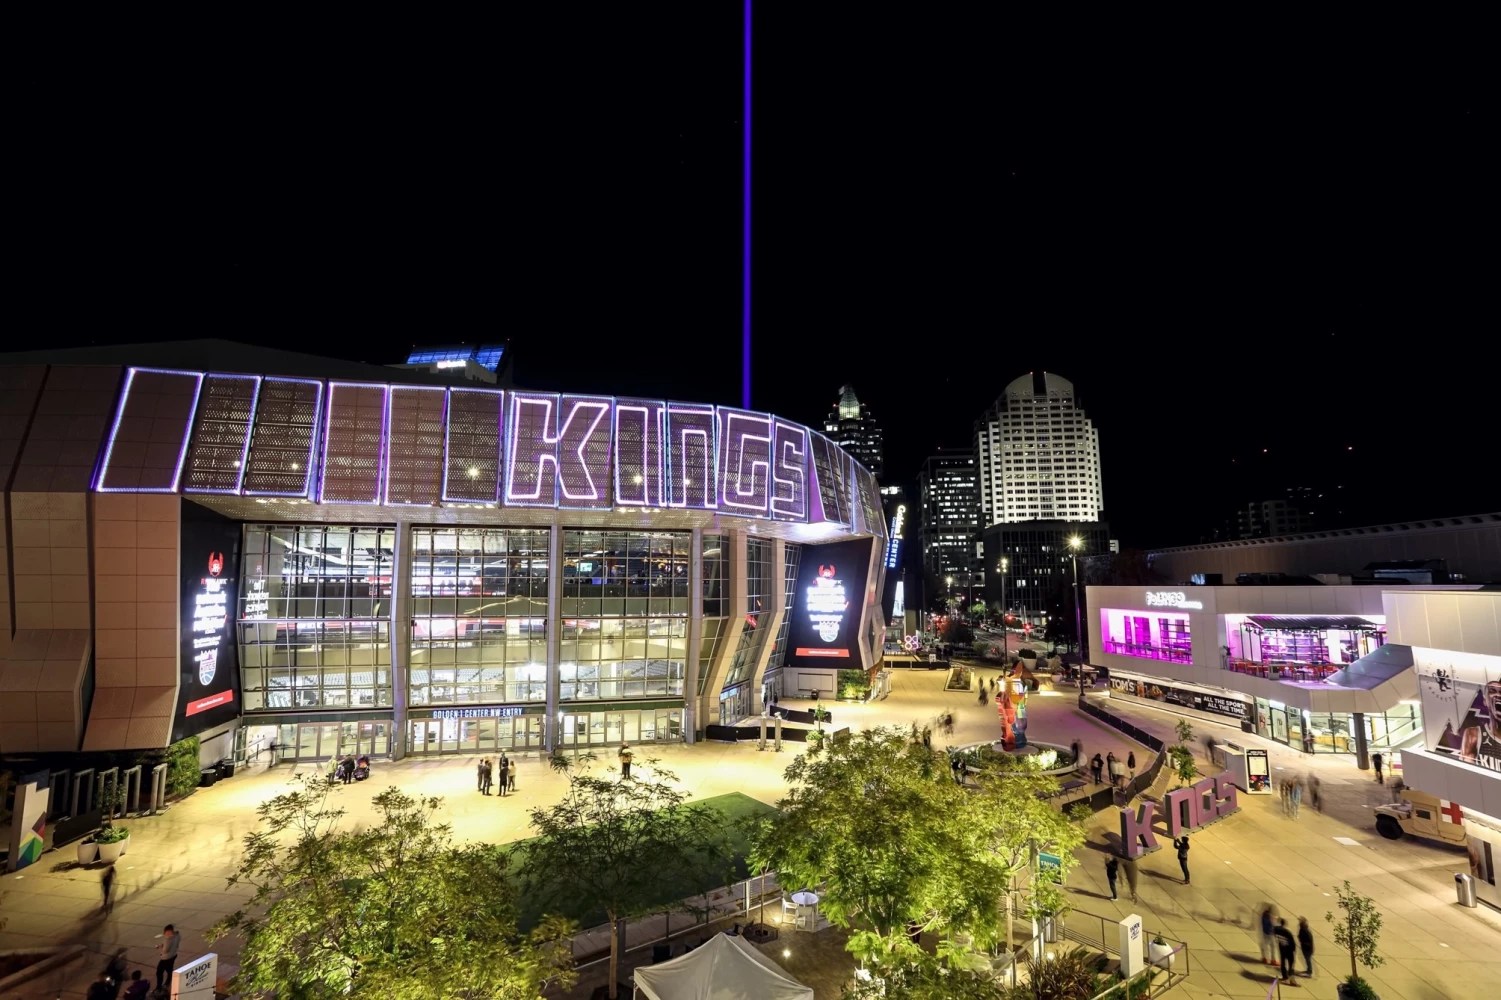 Sacramento Kings add more lasers to make 'The Beam' brighter